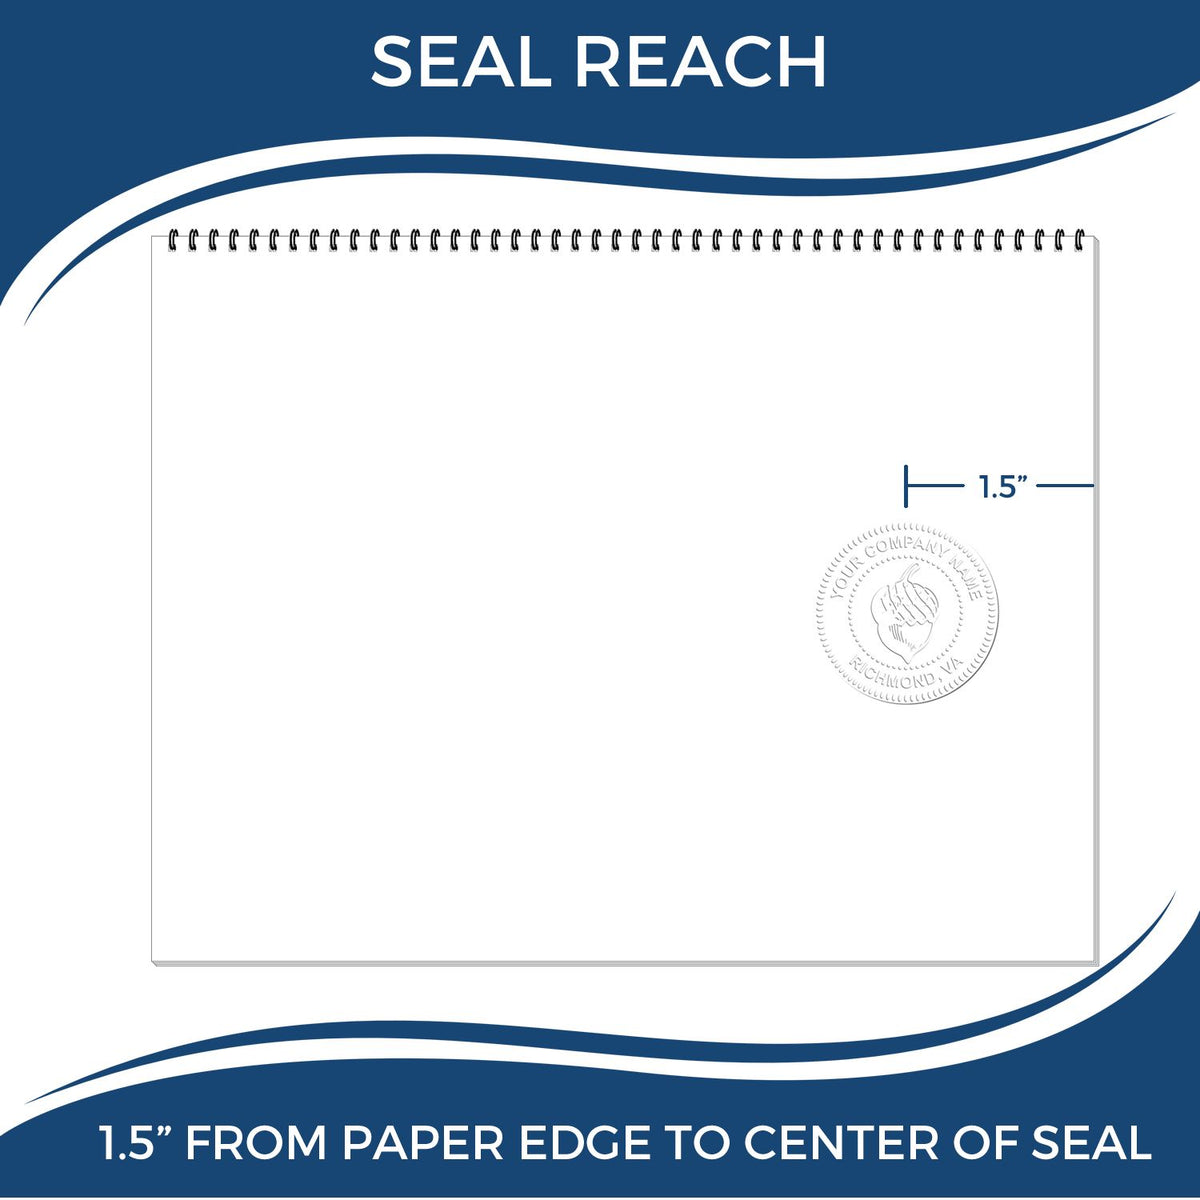 An infographic showing the seal reach which is represented by a ruler and a miniature seal image of the Wisconsin Geologist Desk Seal